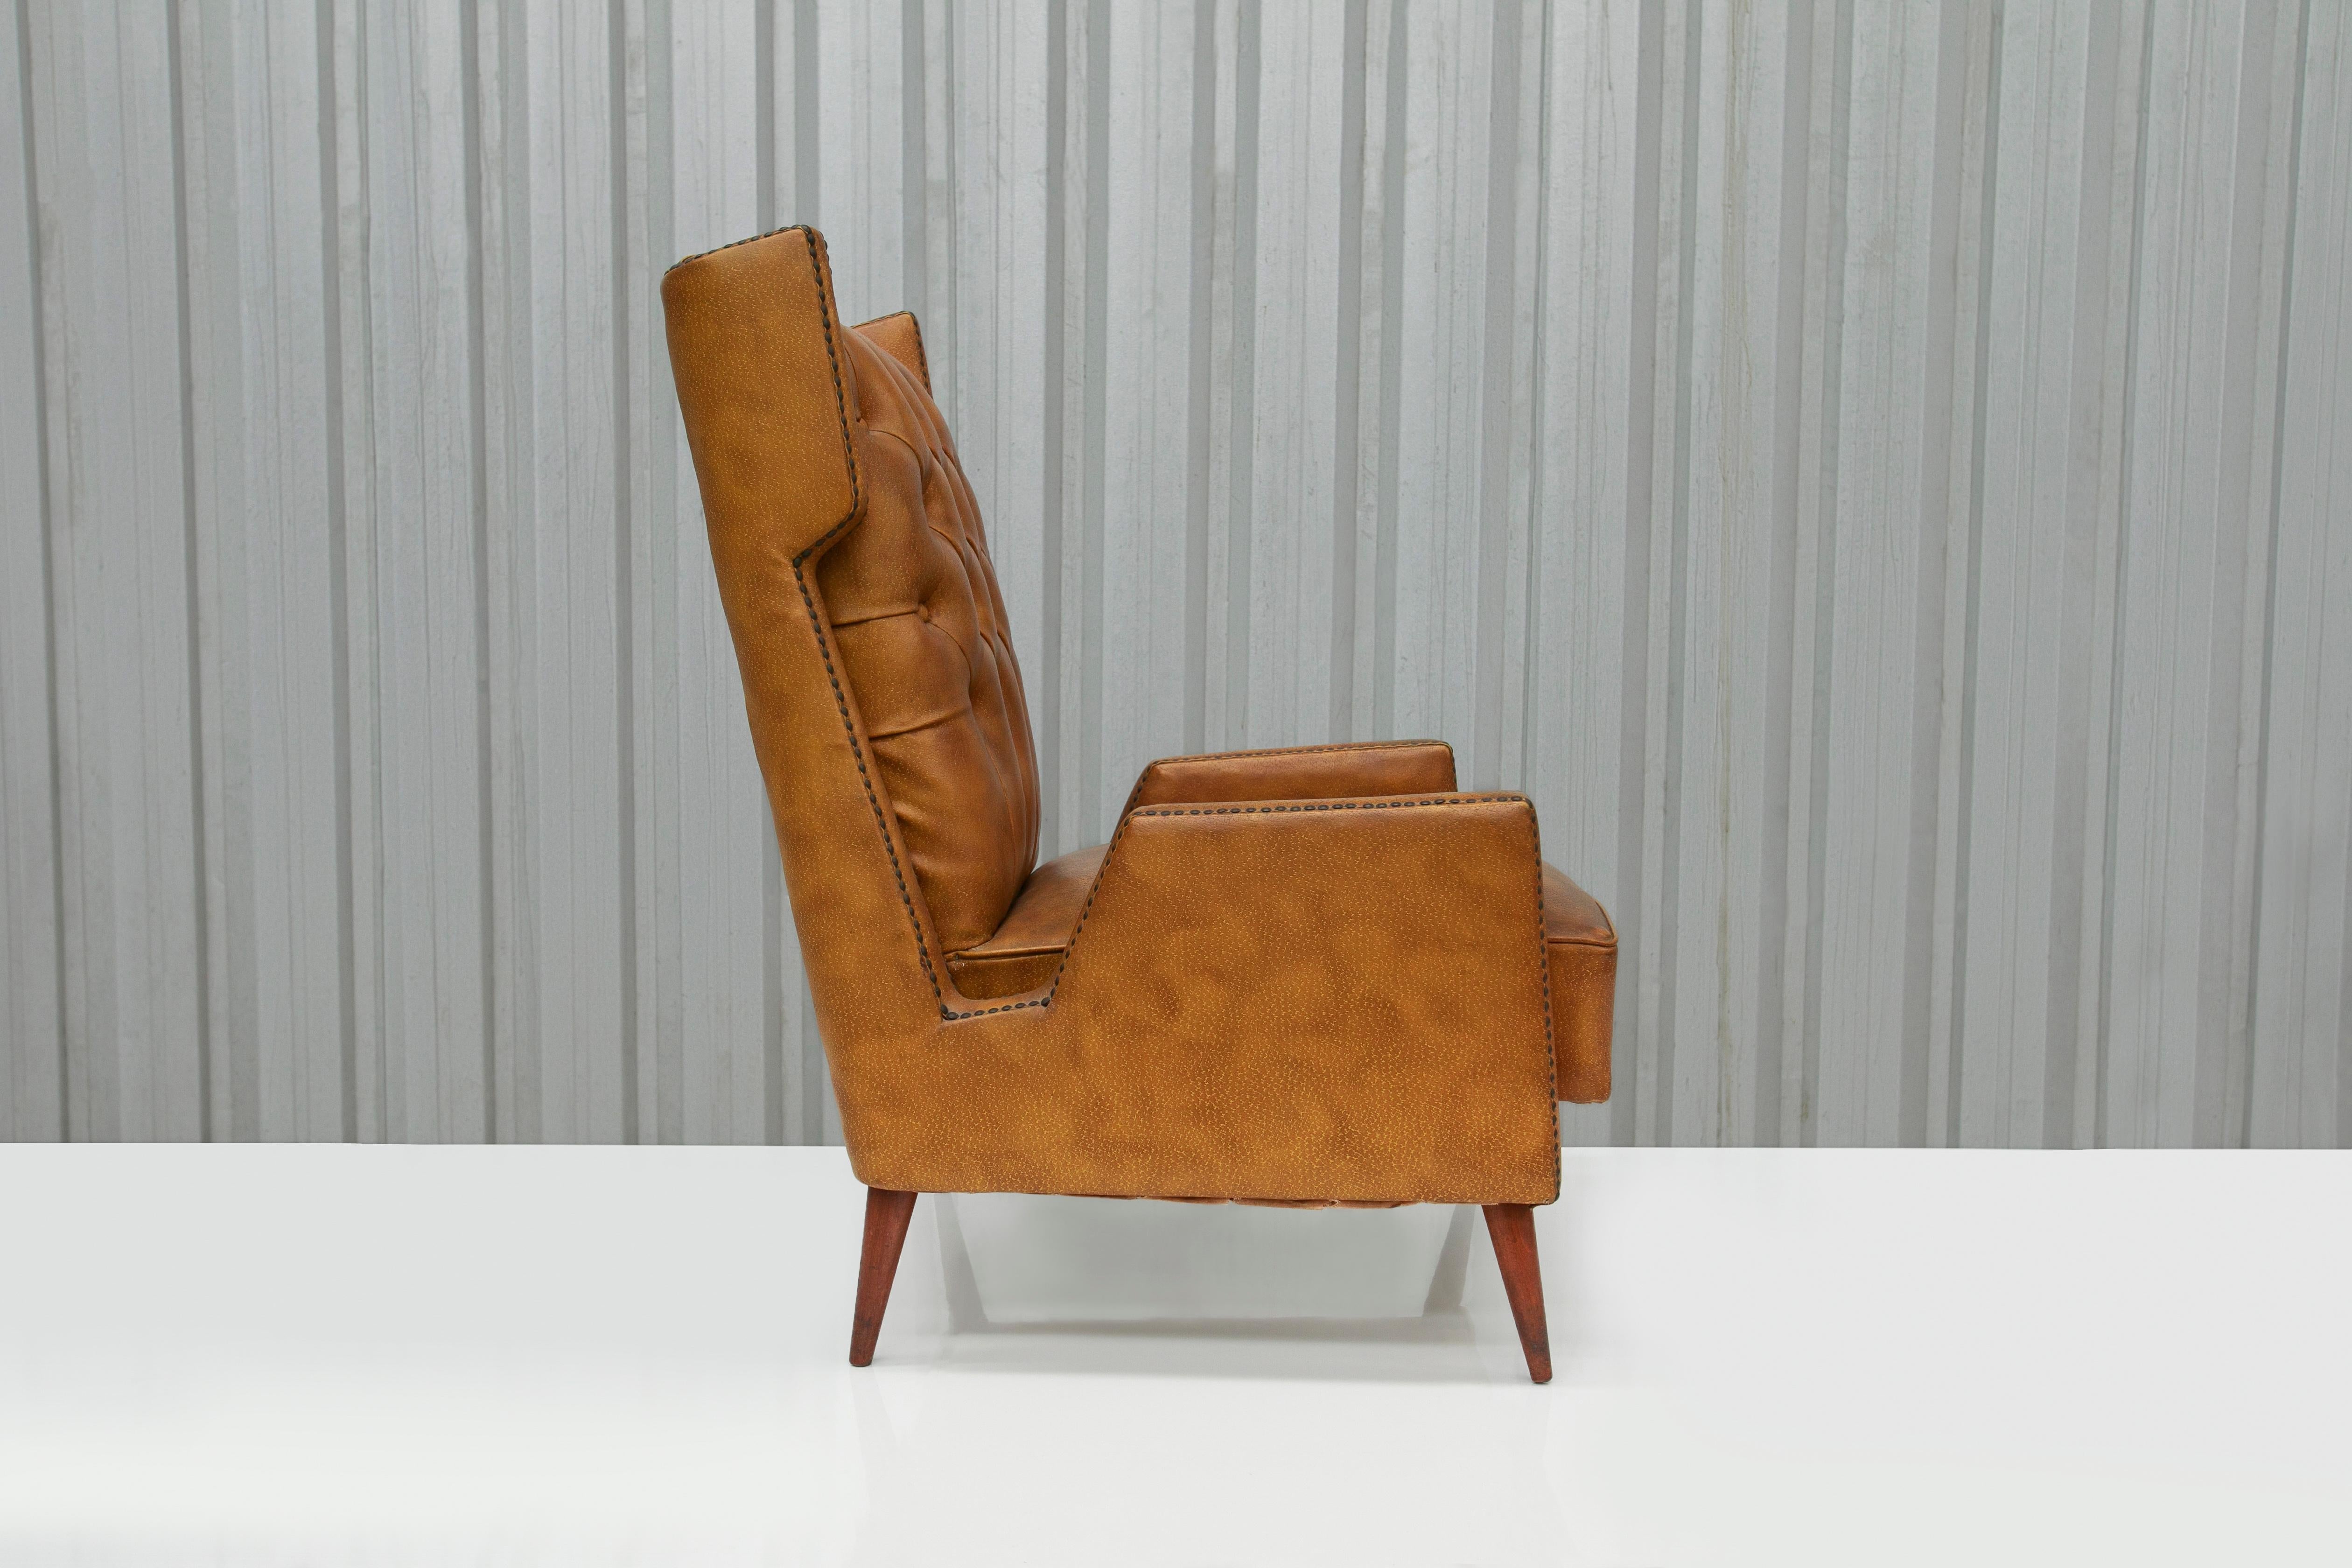 Hand-Crafted Brazilian Modern Armchair in Hardwood, Brown Leatherette, G. Scapinelli, 1950s For Sale